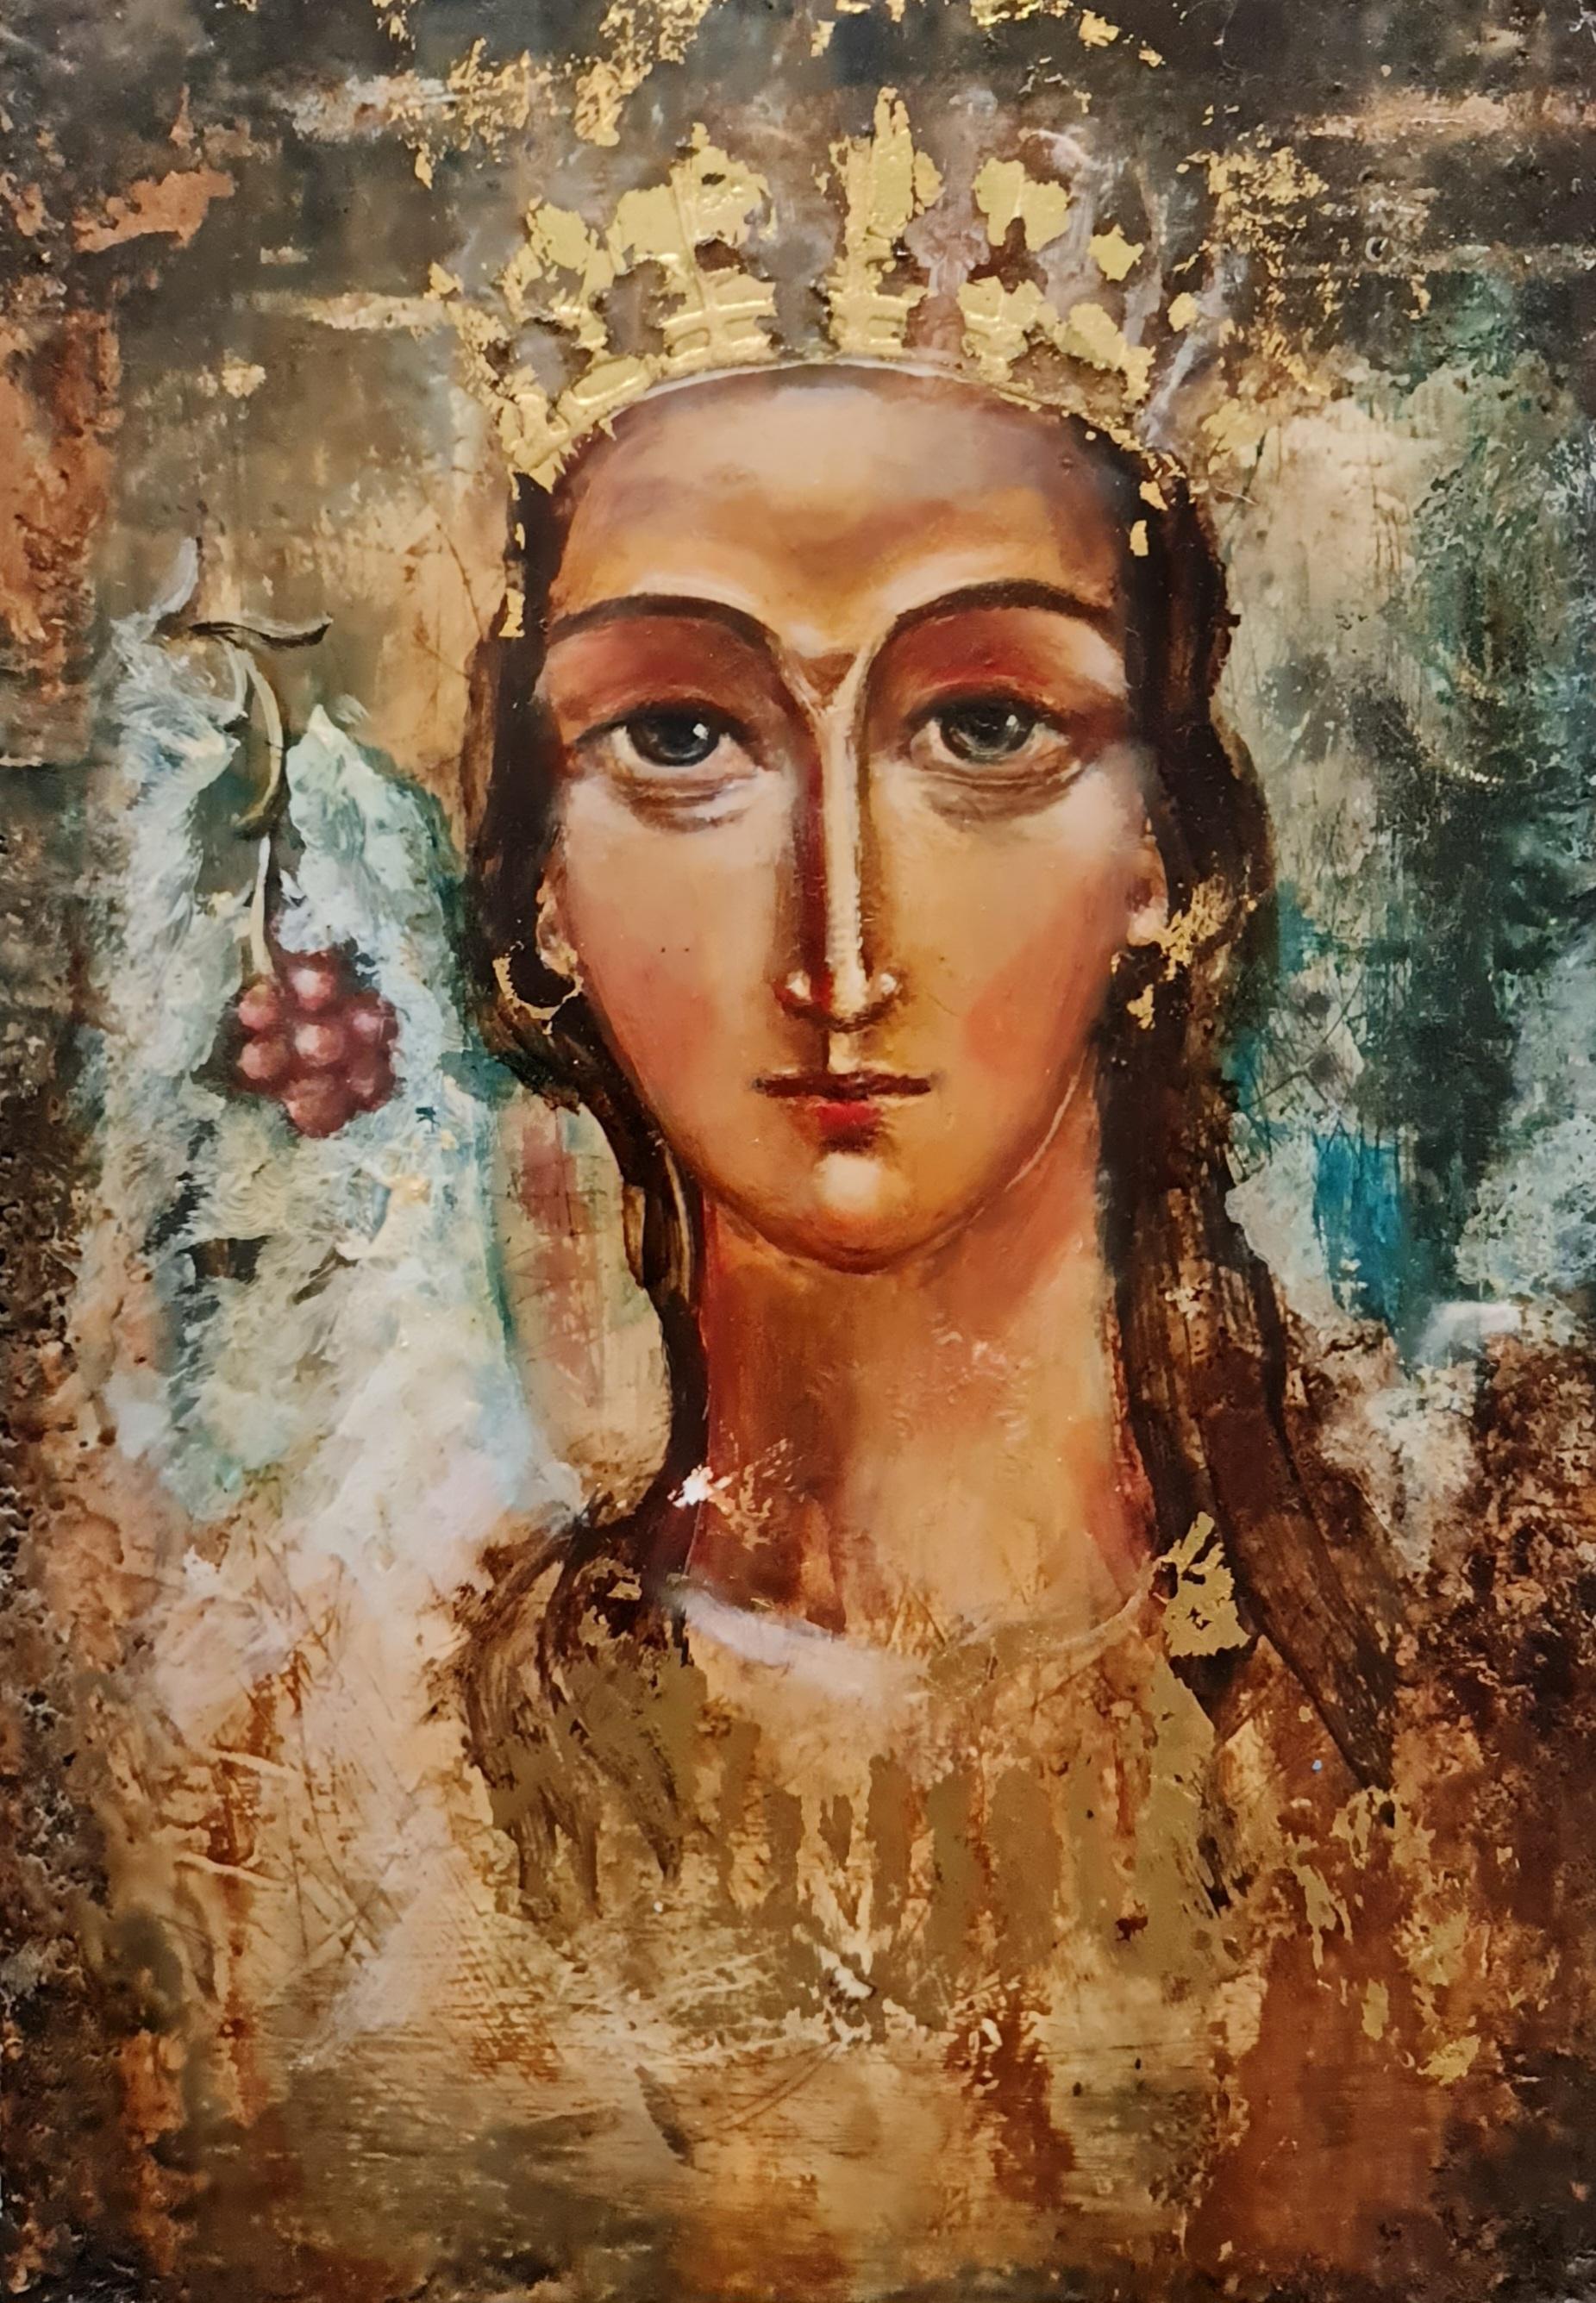 painting in antique style on a wooden panel "Magic image"